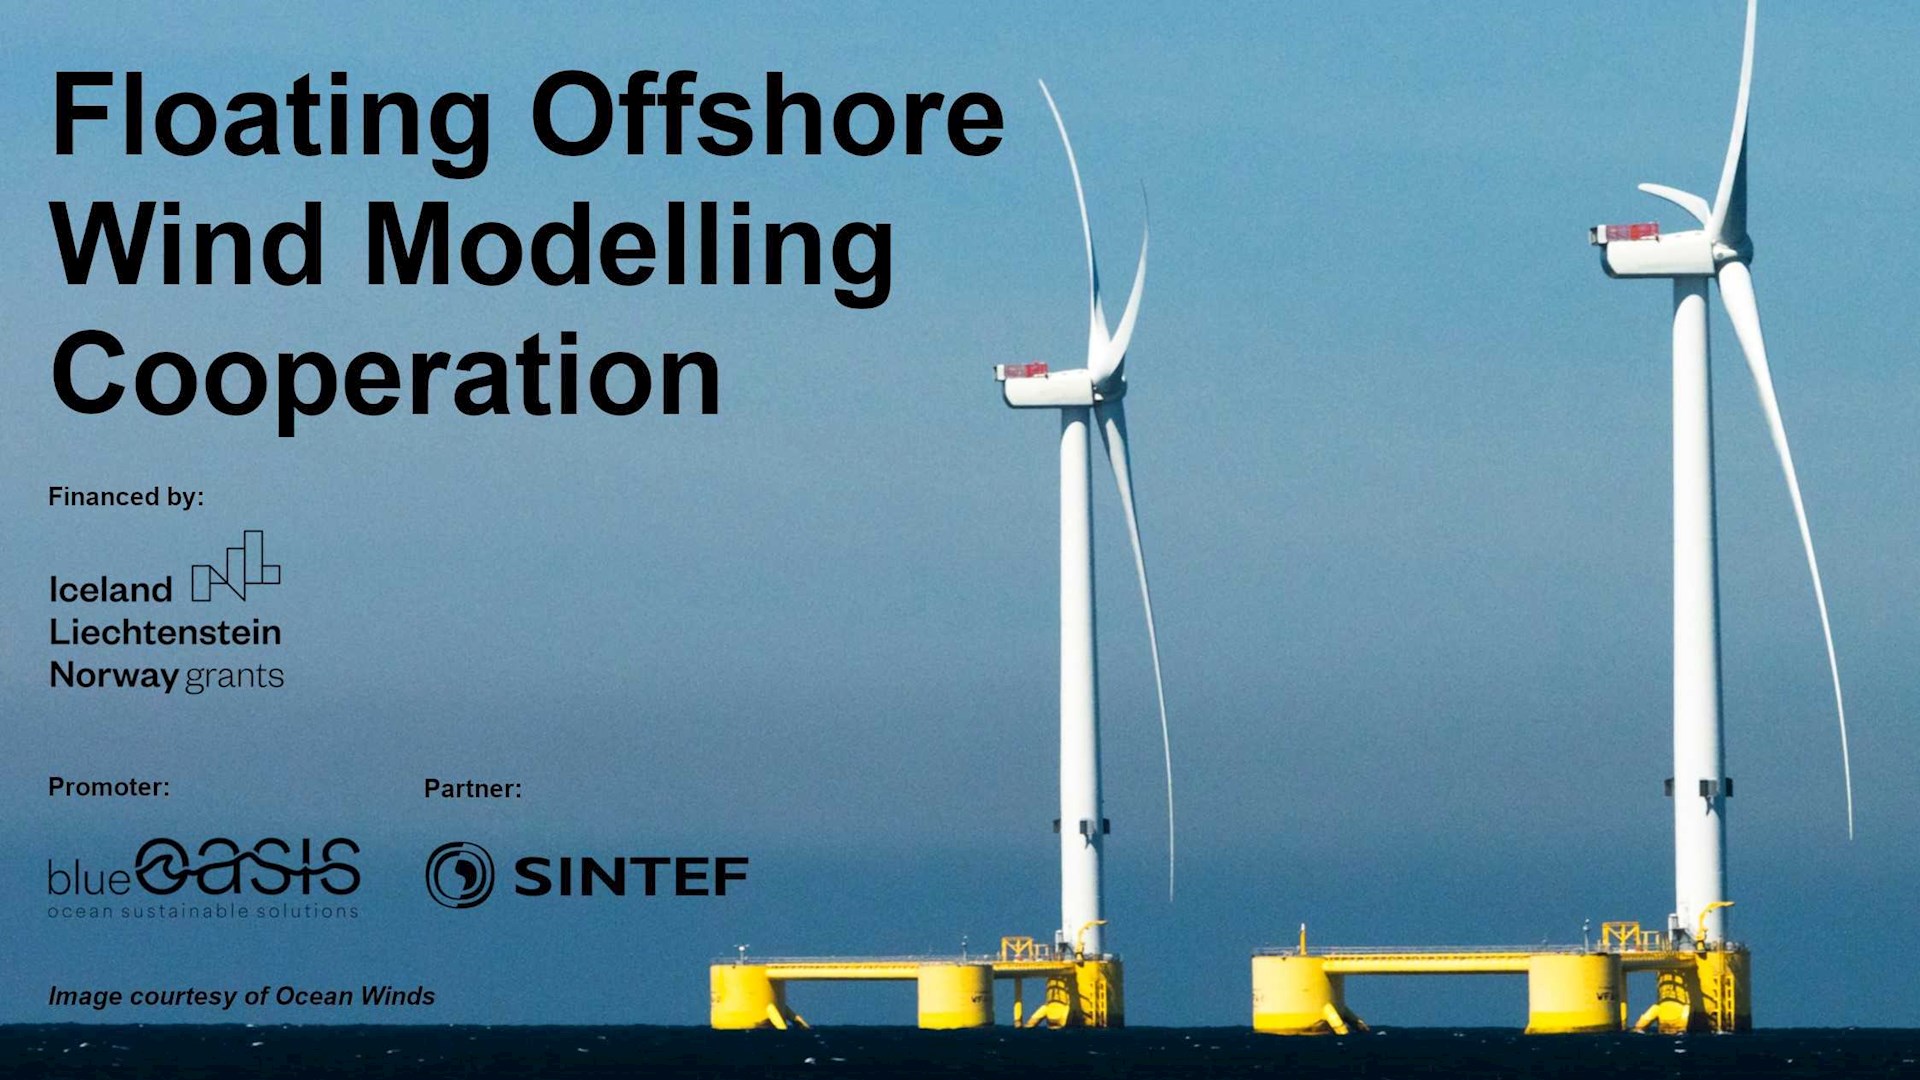 Floating Offshore Wind Modelling Cooperation